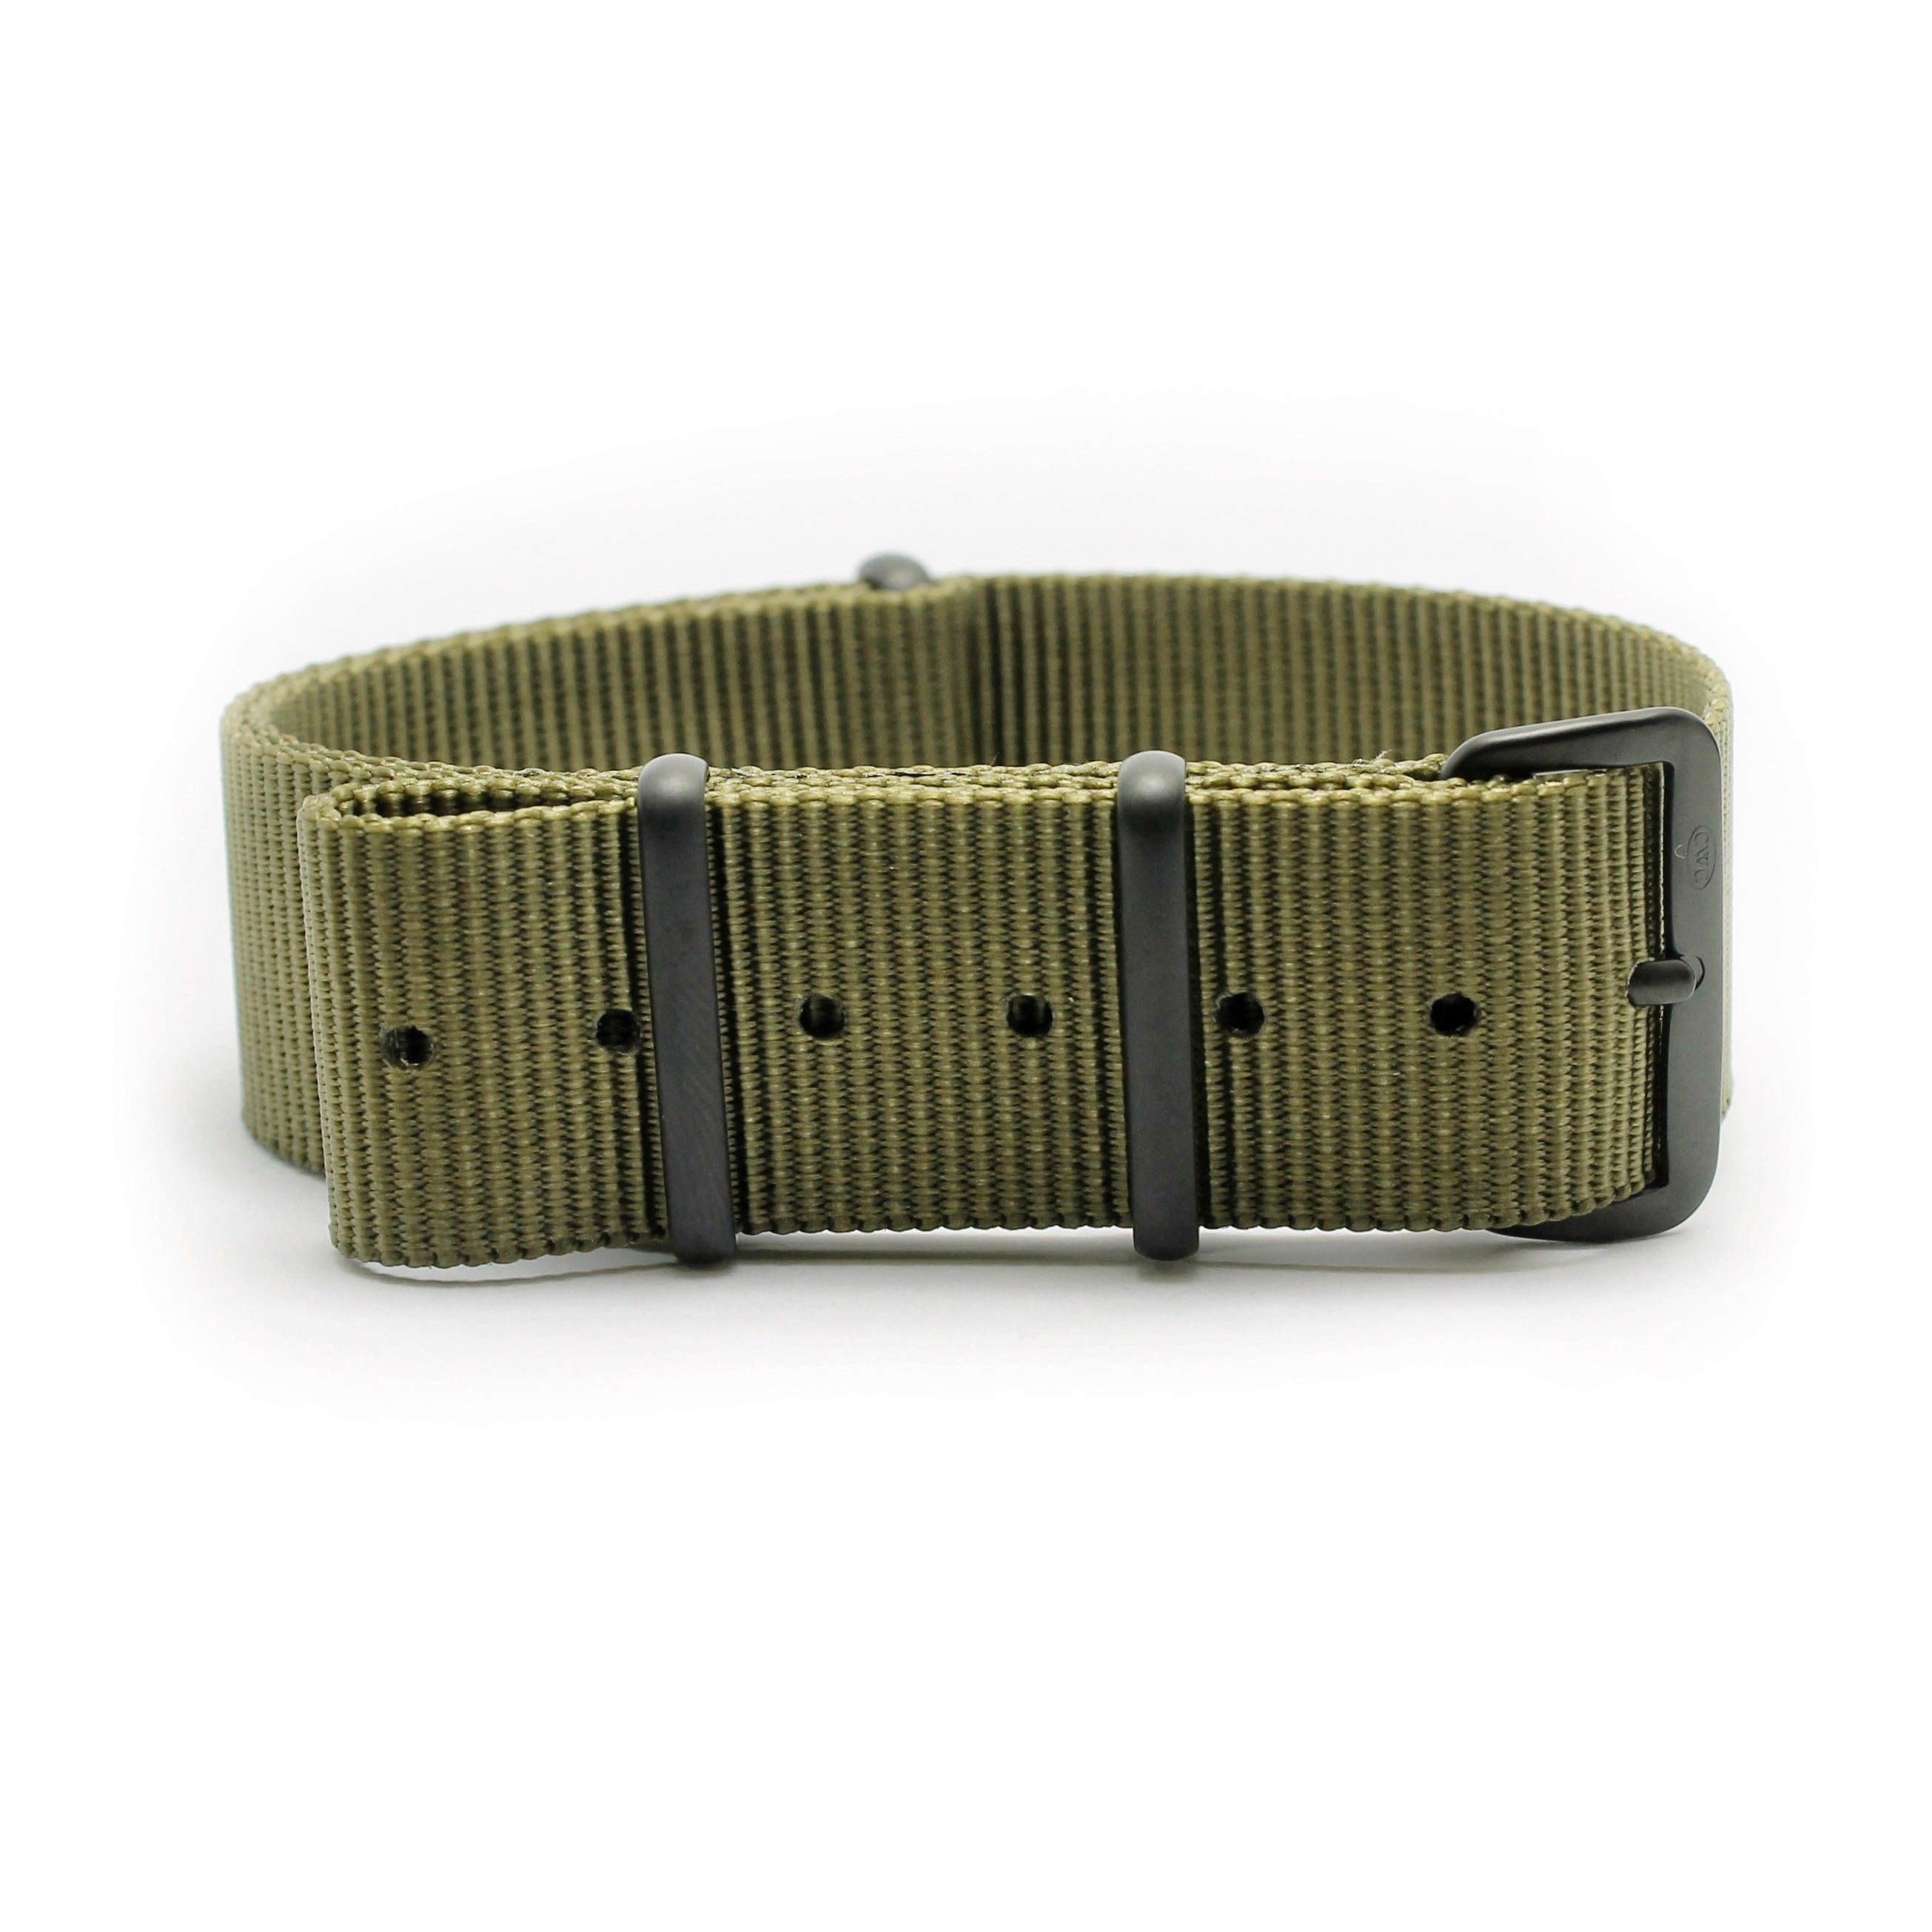 CABOT MILITARY WATCH STRAP - GREEN WITH MATTE BLACK BUCKLE